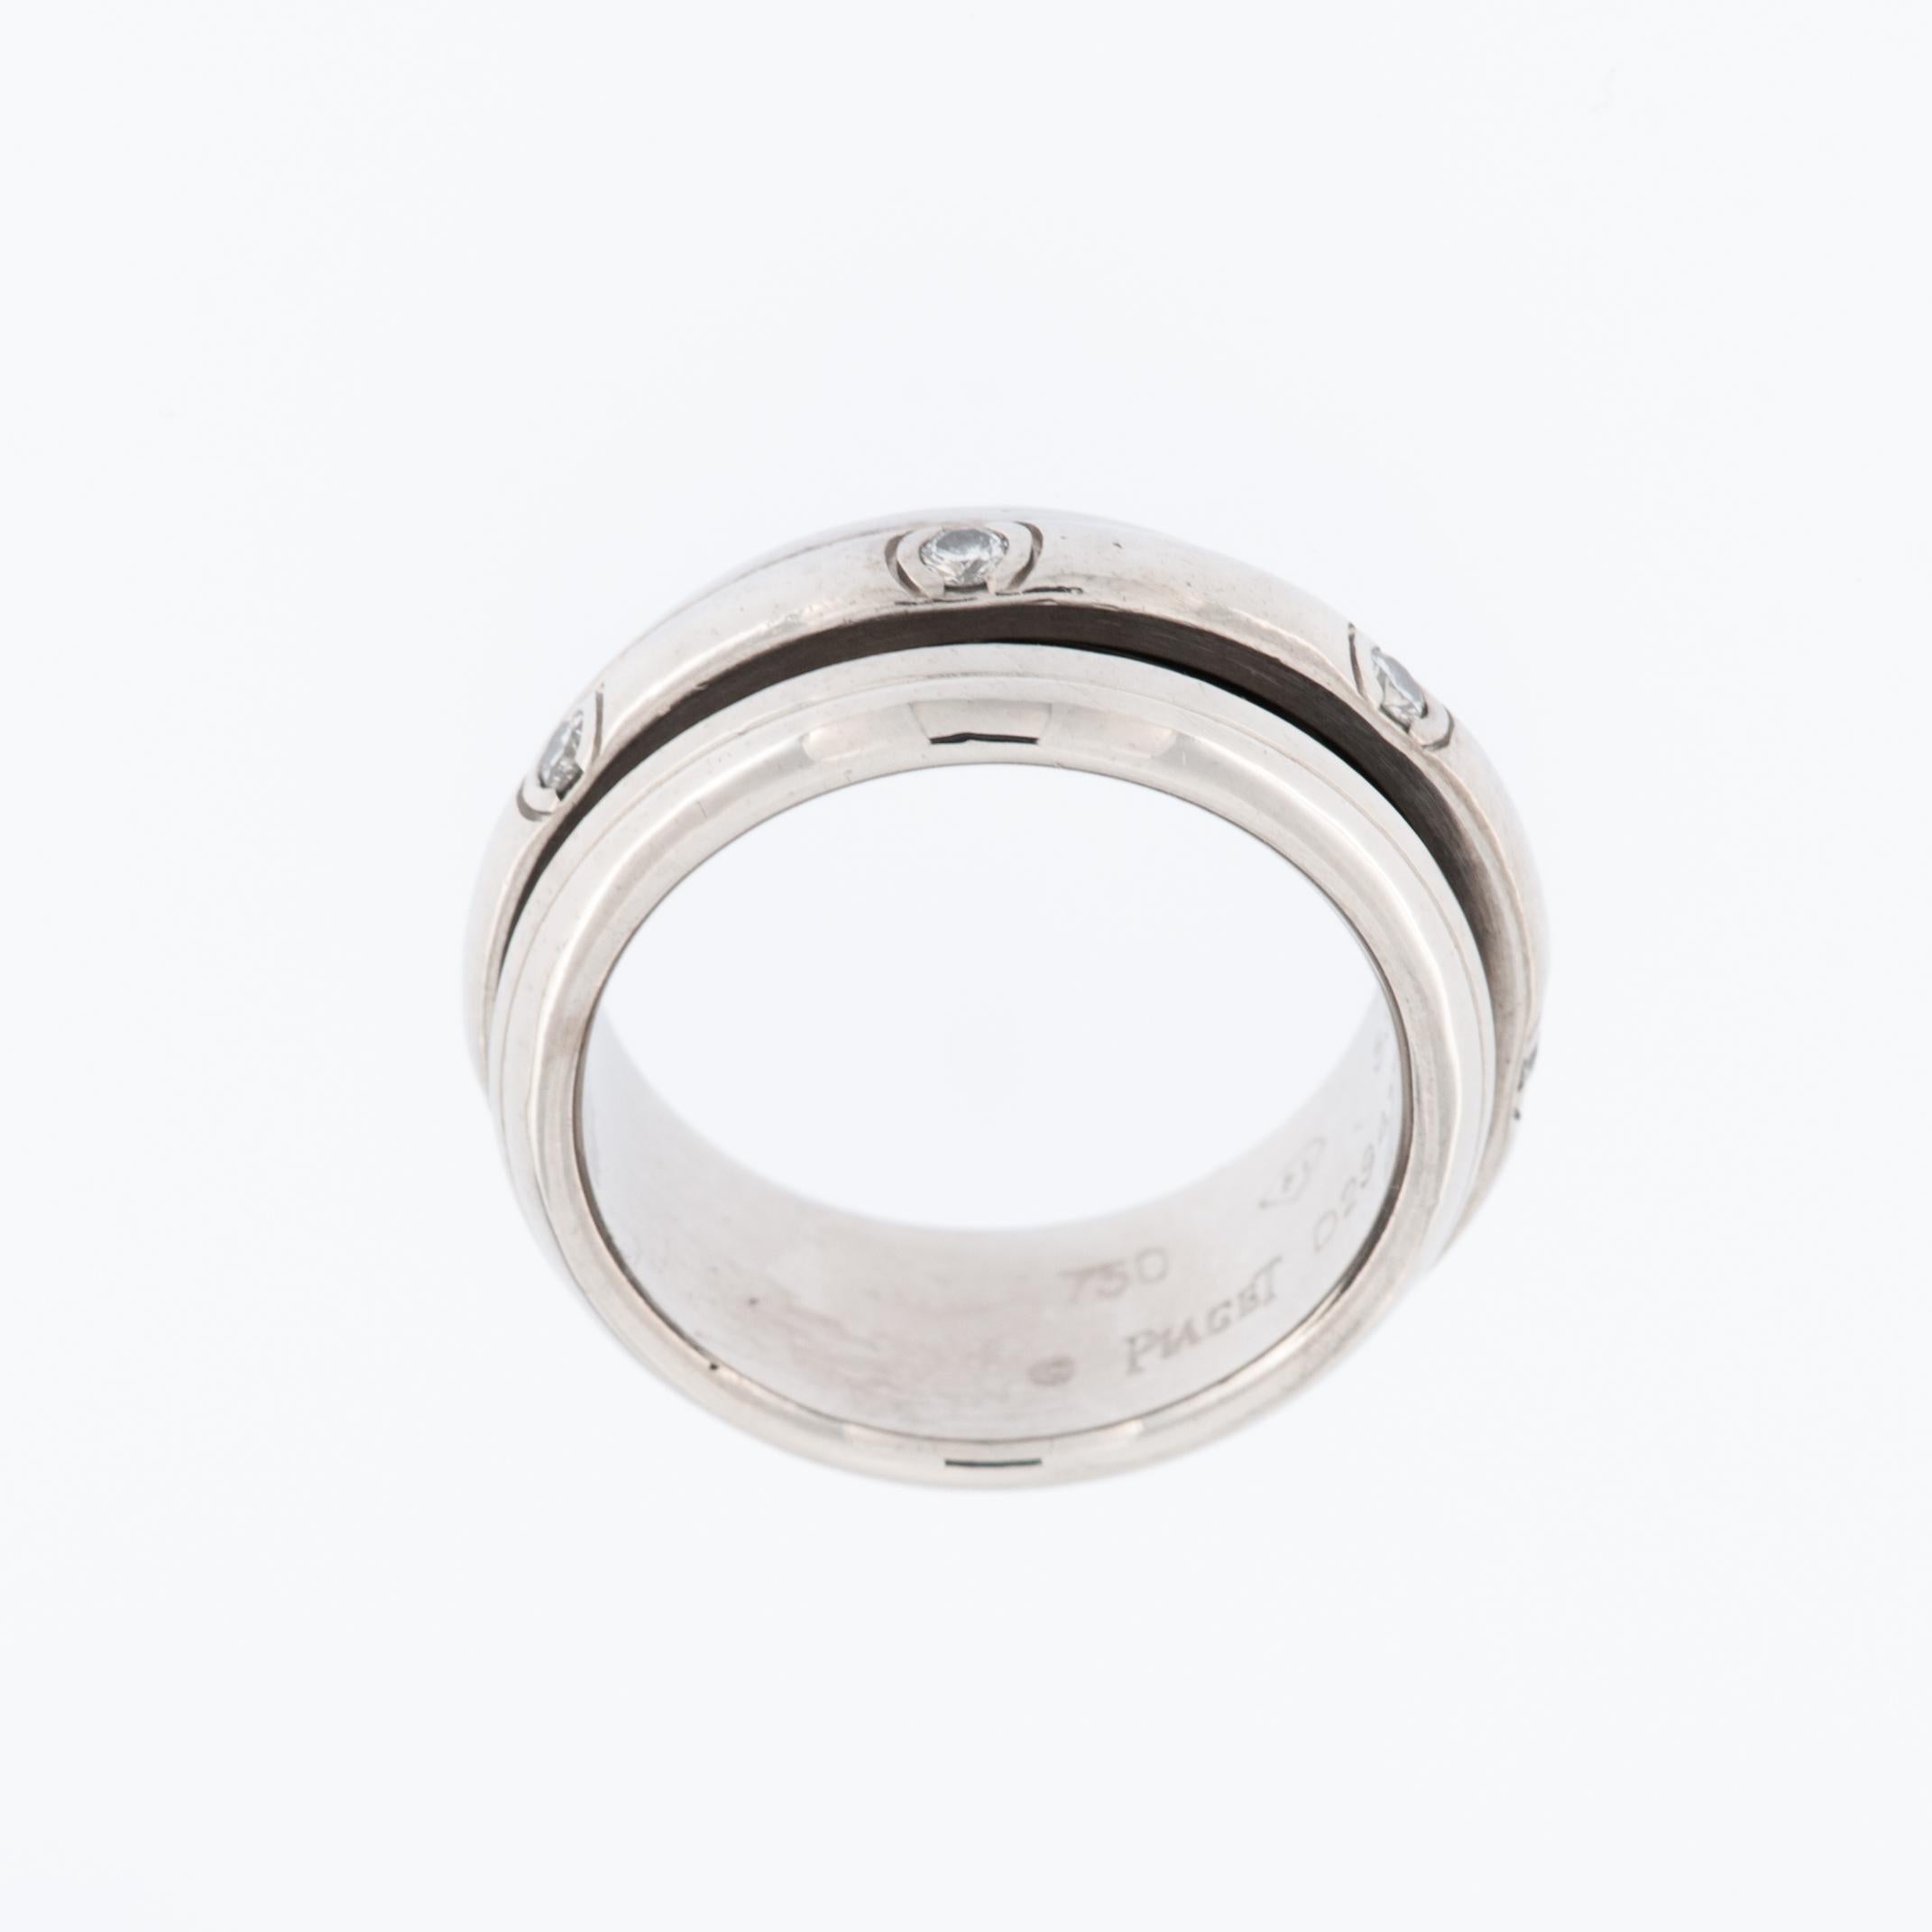 The Piaget Possession Large Band Ring in 18 karat White Gold with Diamonds is a striking and luxurious piece of jewelry that reflects Piaget's commitment to craftsmanship, innovation, and timeless elegance.

Crafted from gleaming 18 karat white